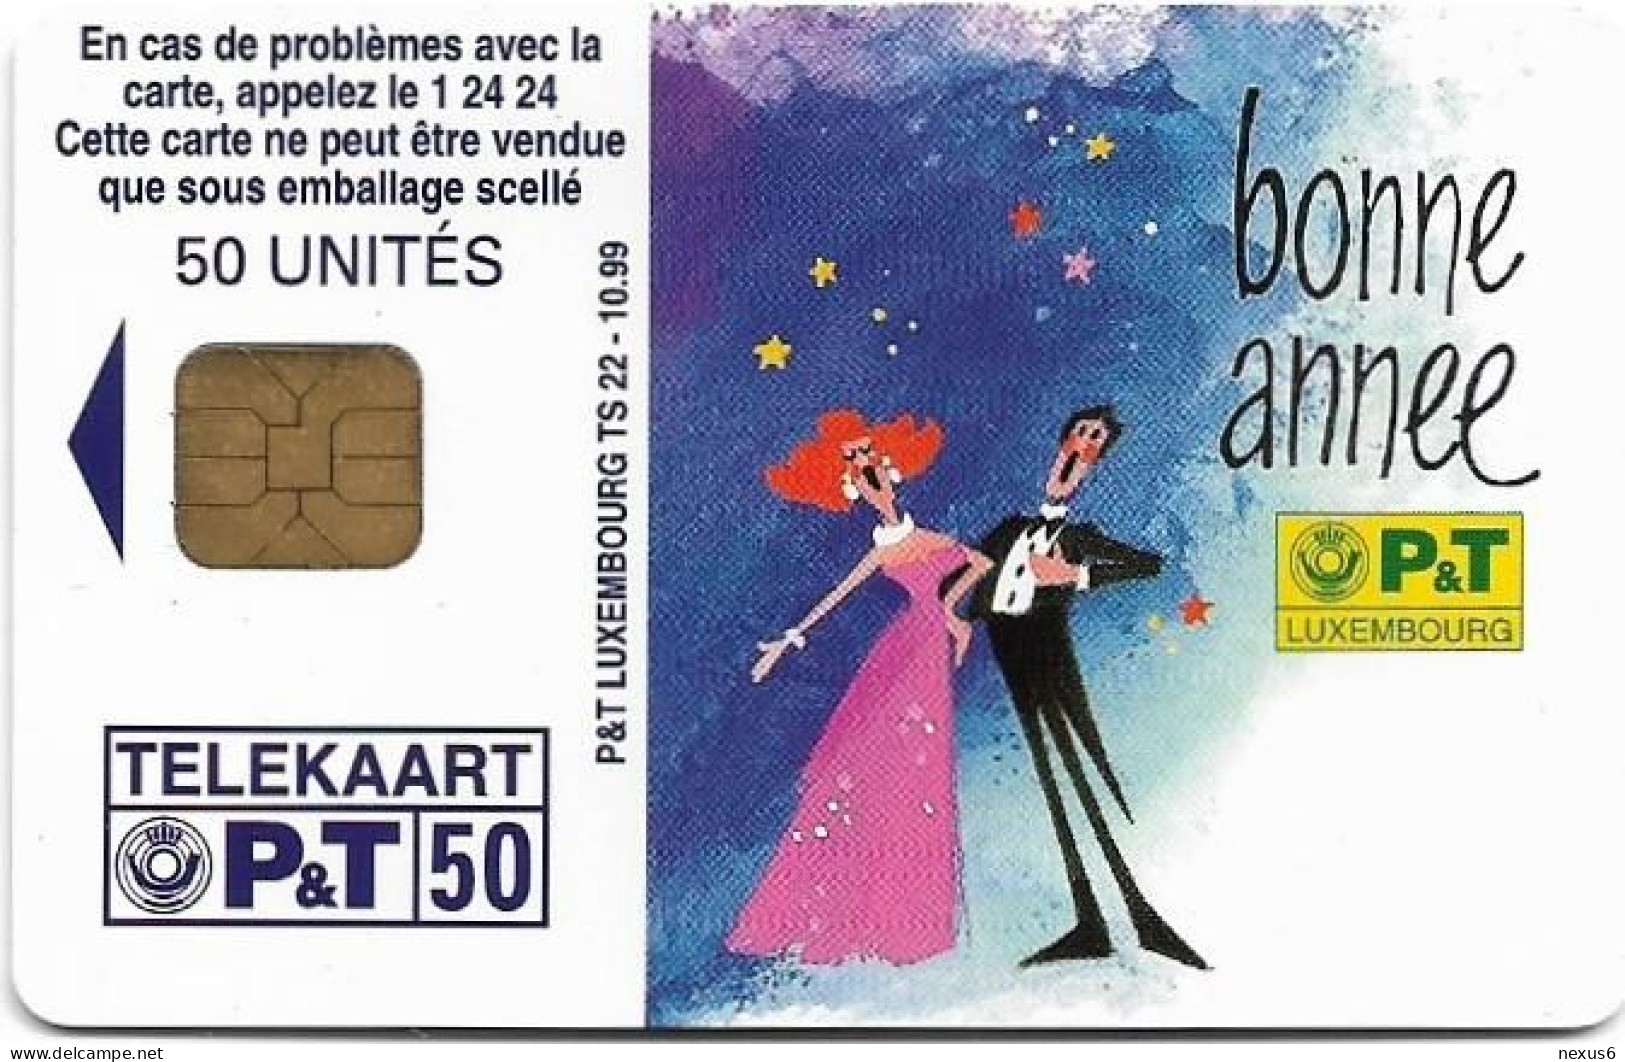 Luxembourg - P&T - Bonne Année 2000, 10.1999, 50Units, Used - Luxembourg